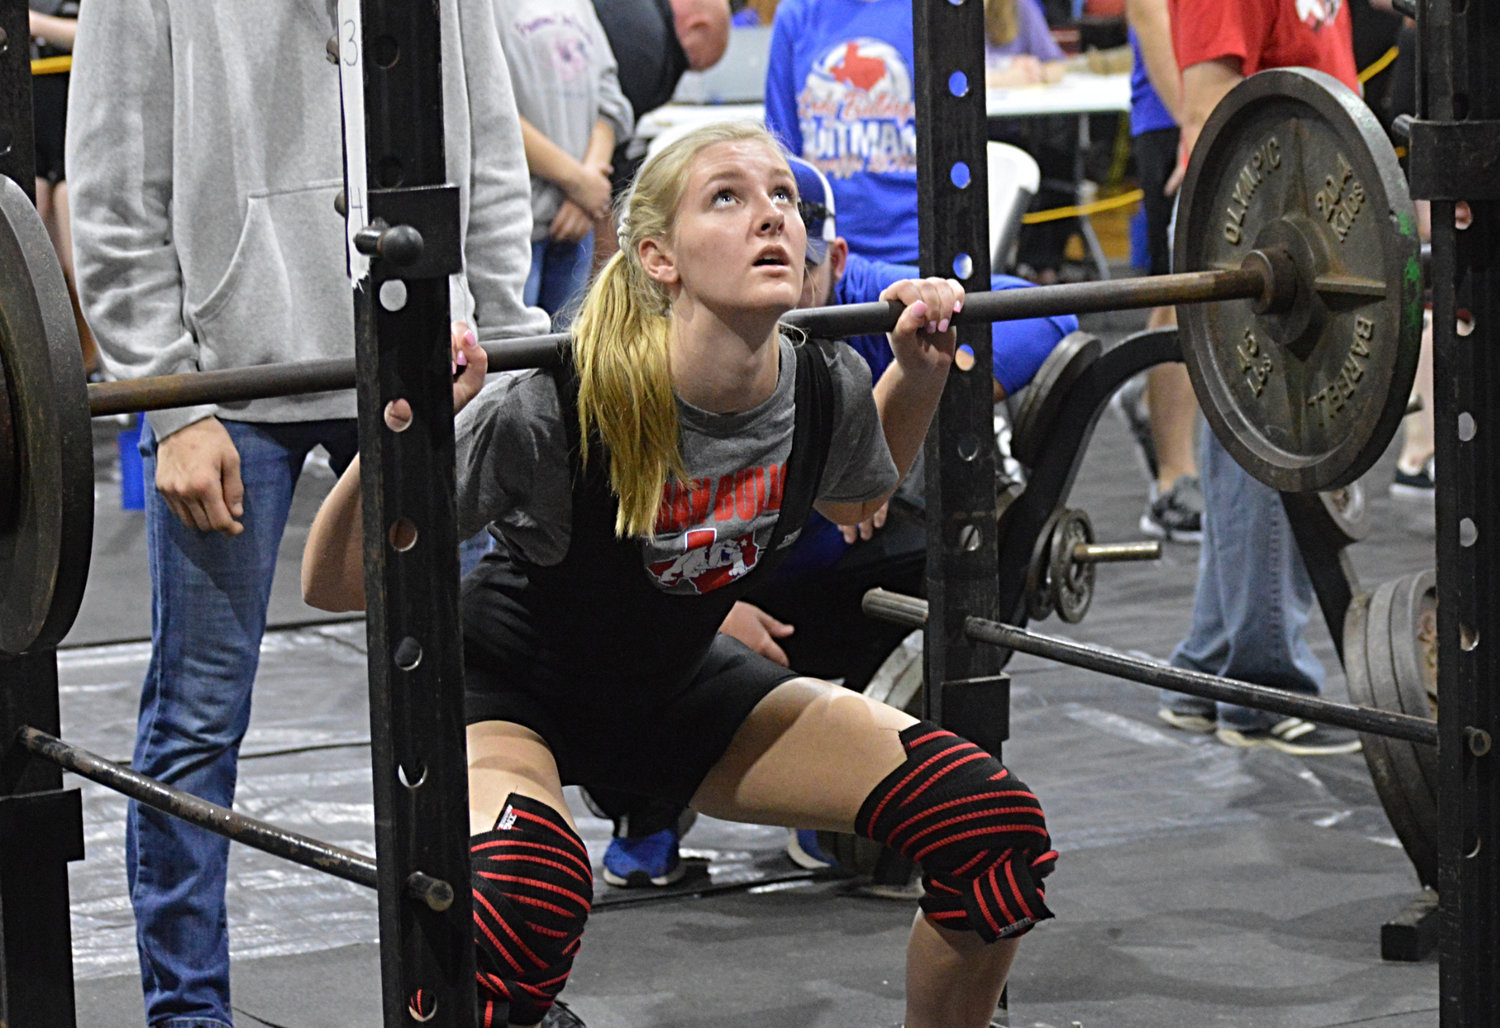 Quitman High School junior Julia Simpkins prepares to rise up with the bar during the girls power lifting competition Saturday in Quitman